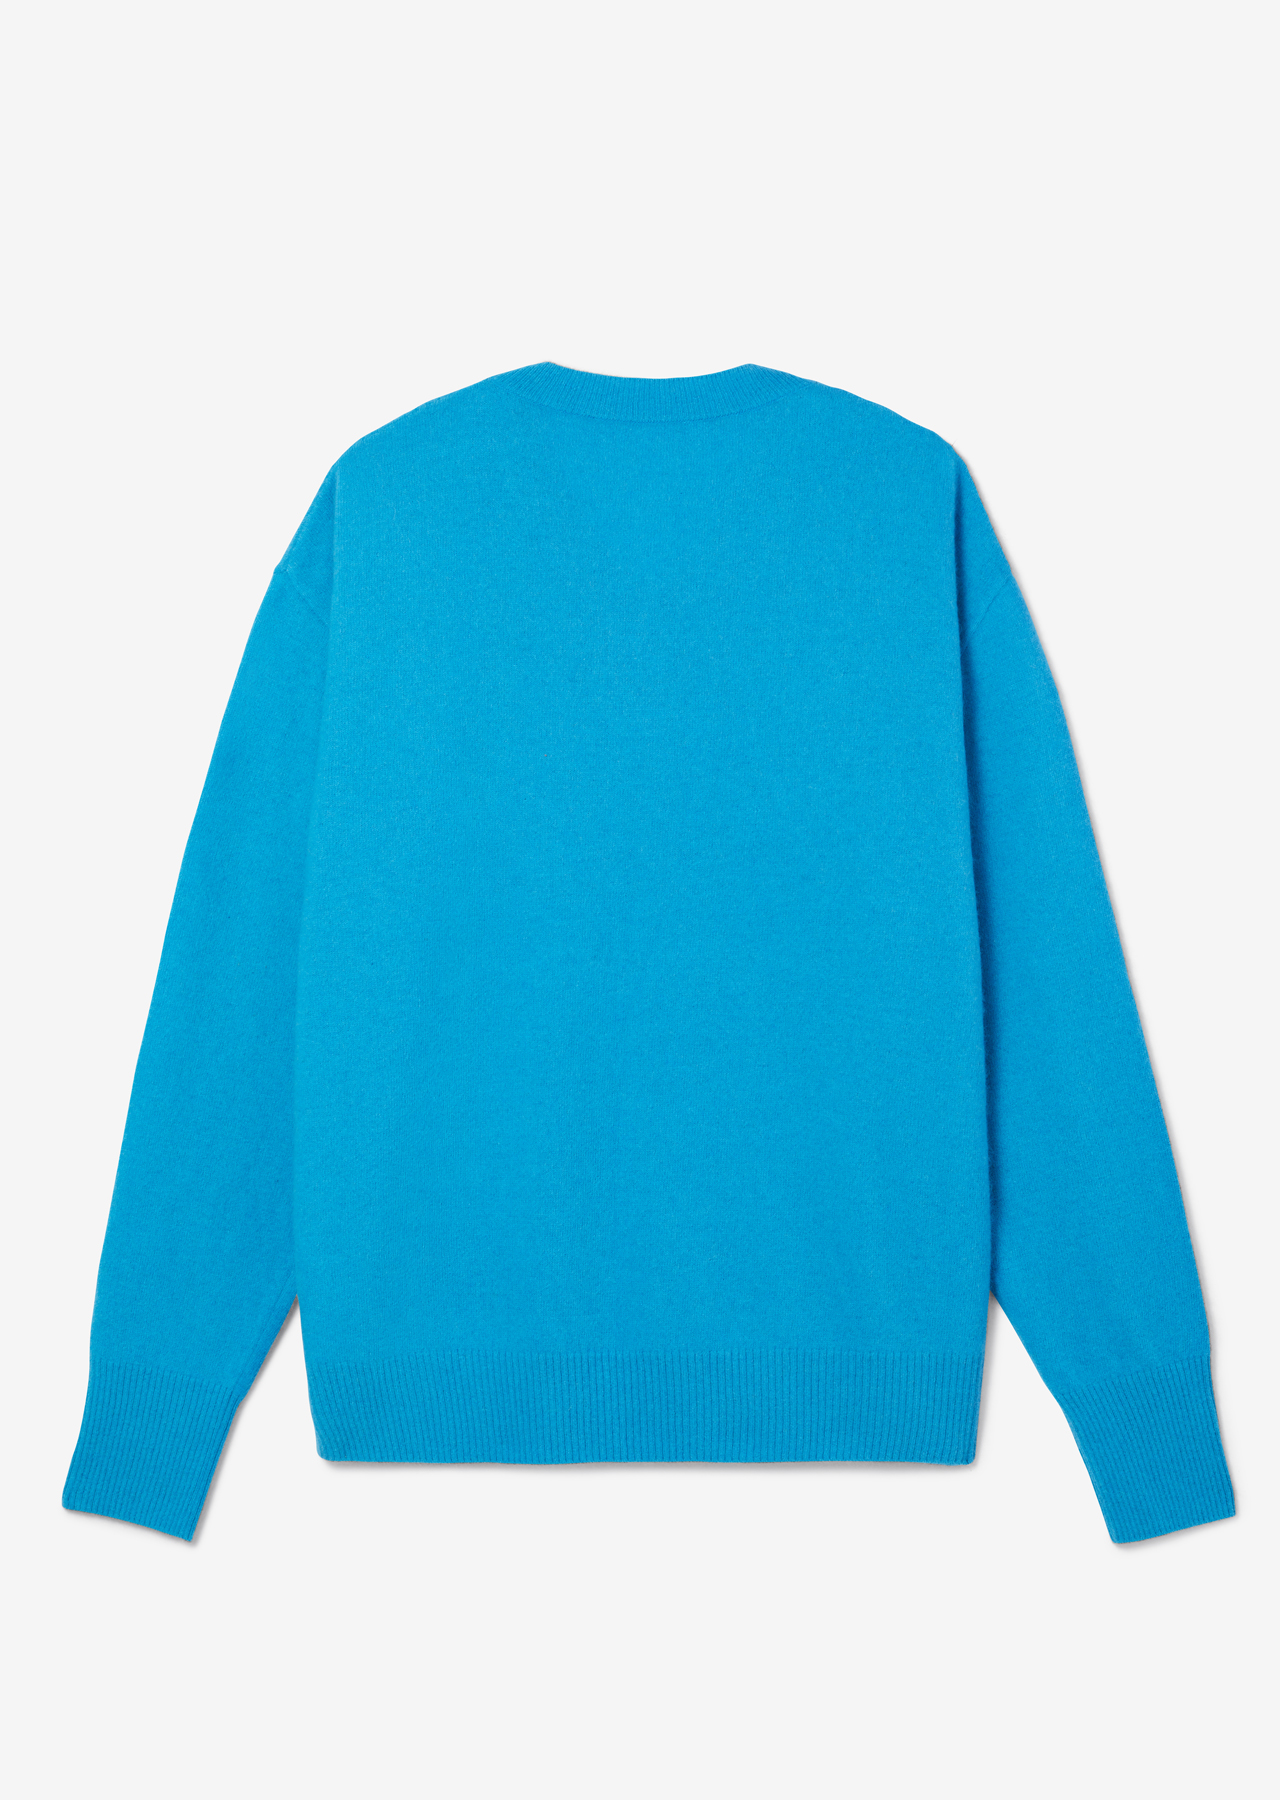 RACCOON V-NECK SWEATER TURQUOISE - 에스이오